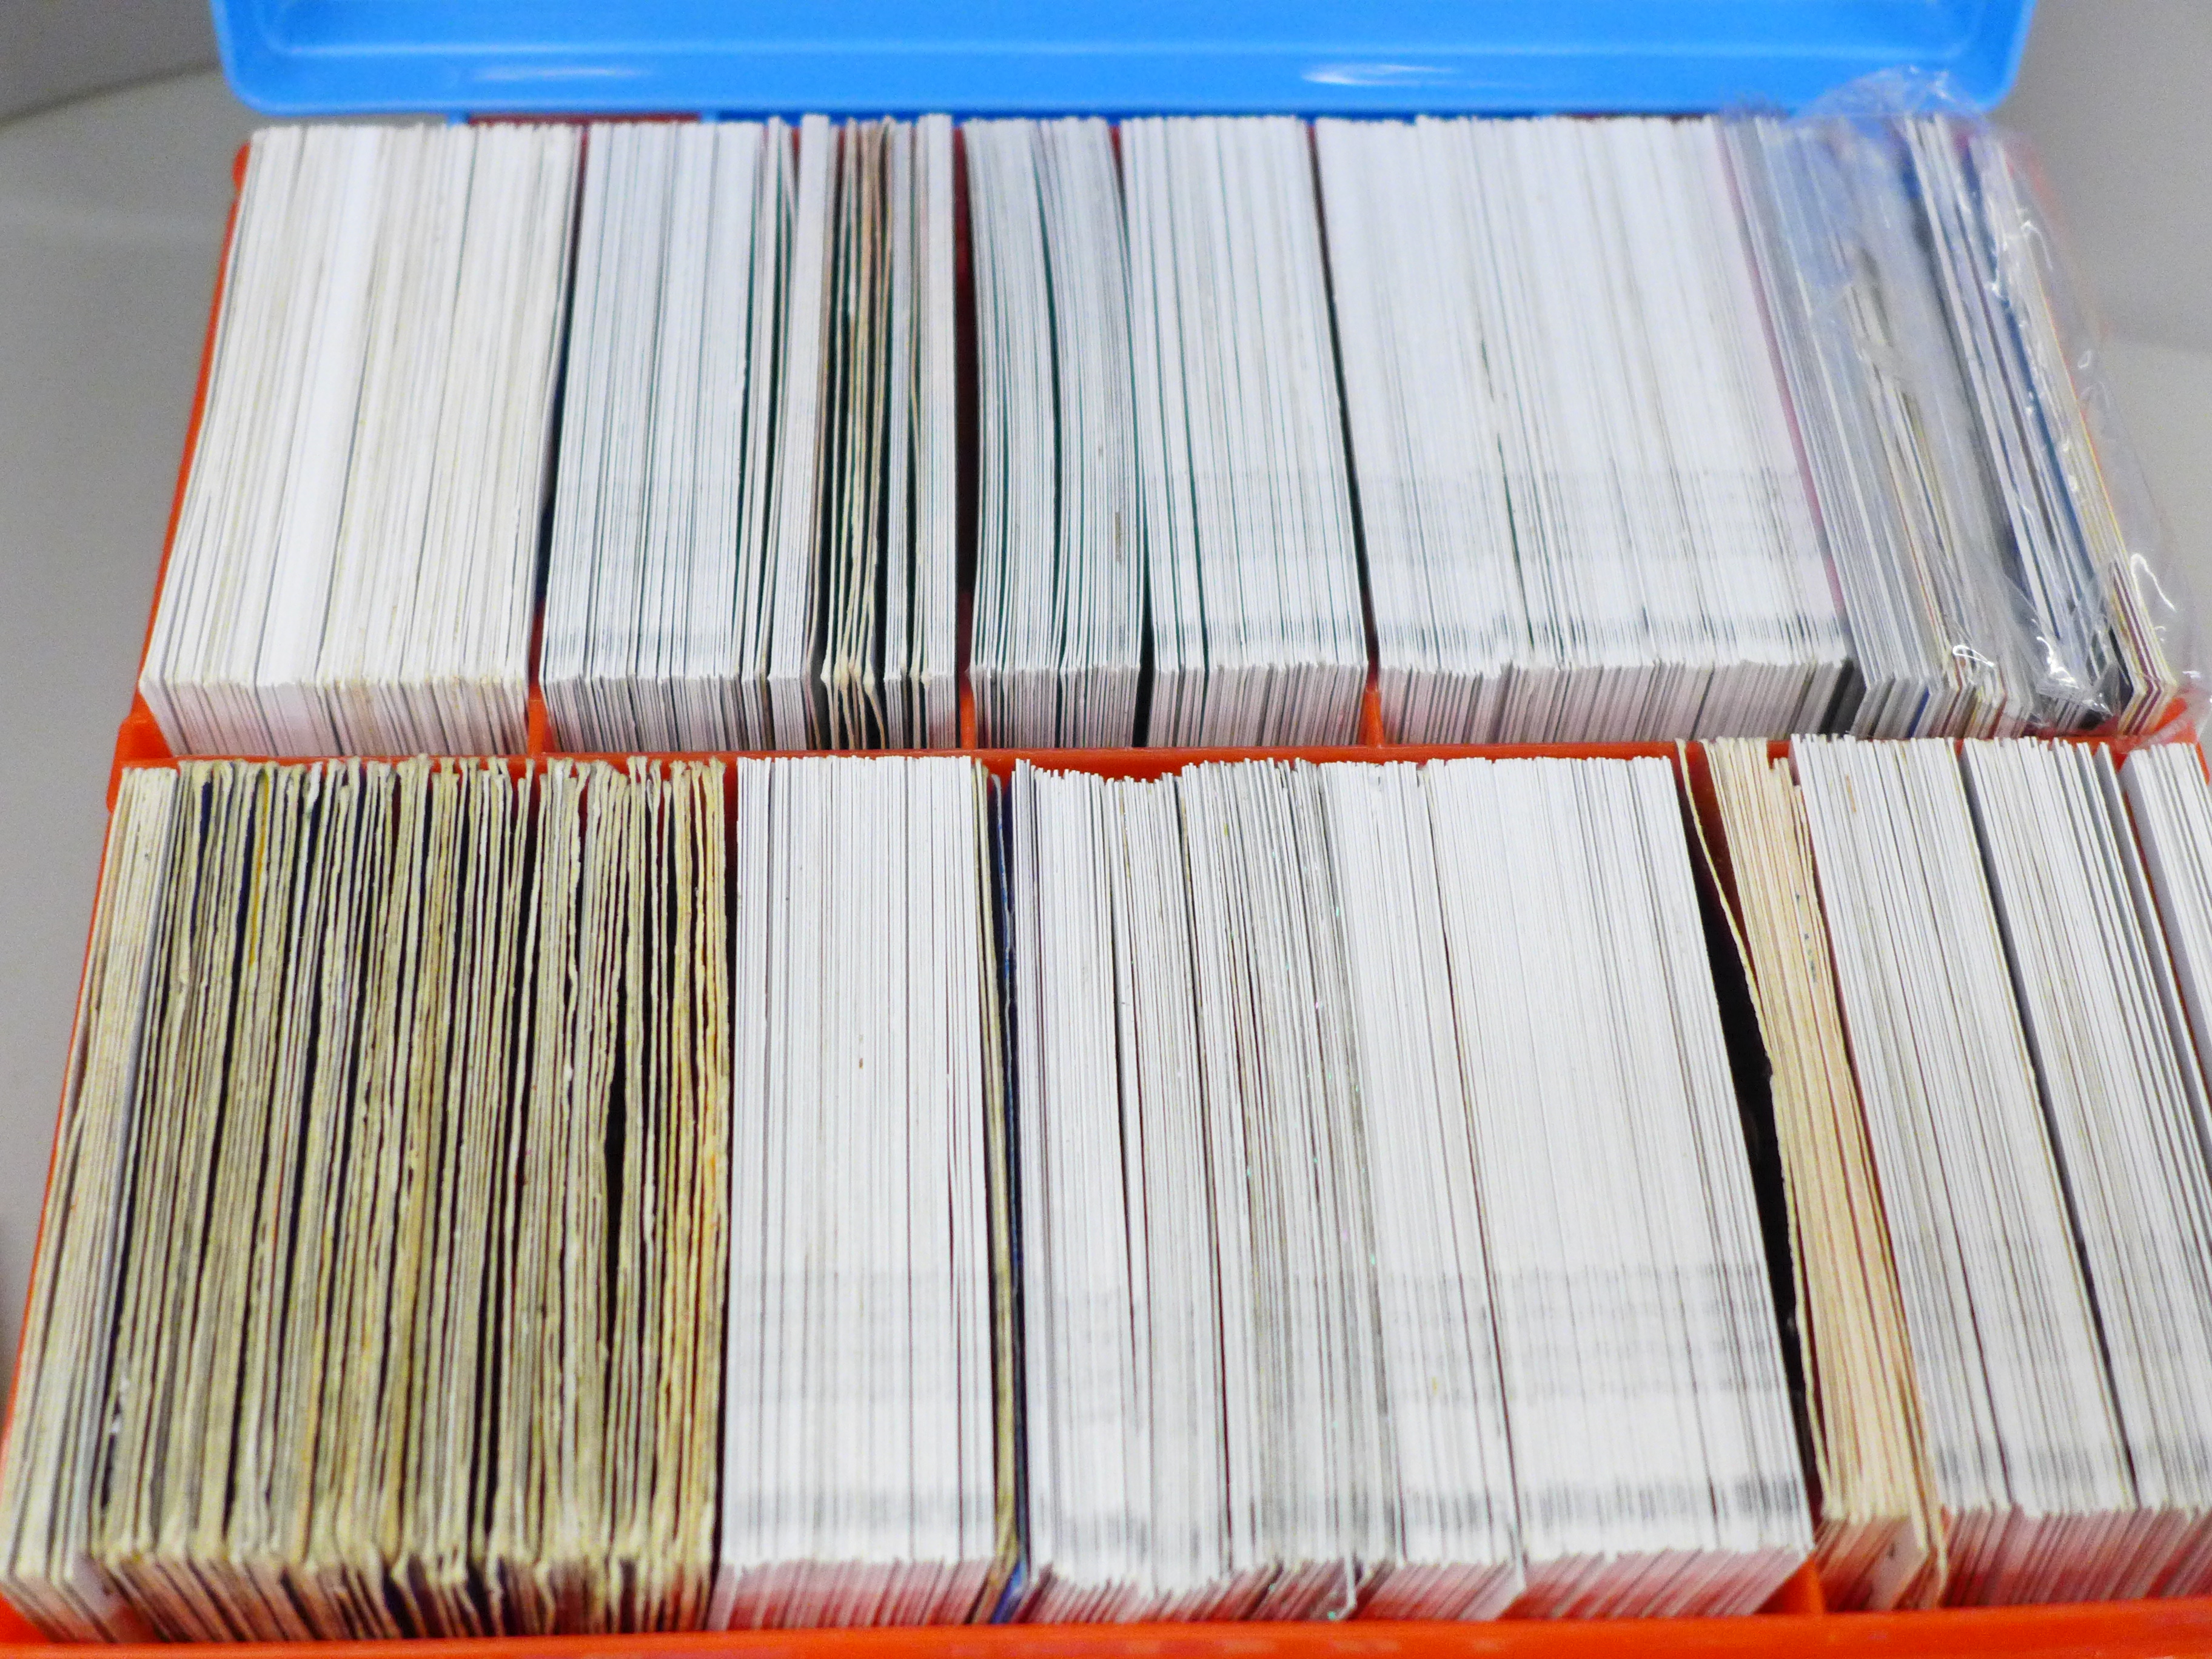 Approximately 500 Match Attax collectors cards in case - Image 3 of 5